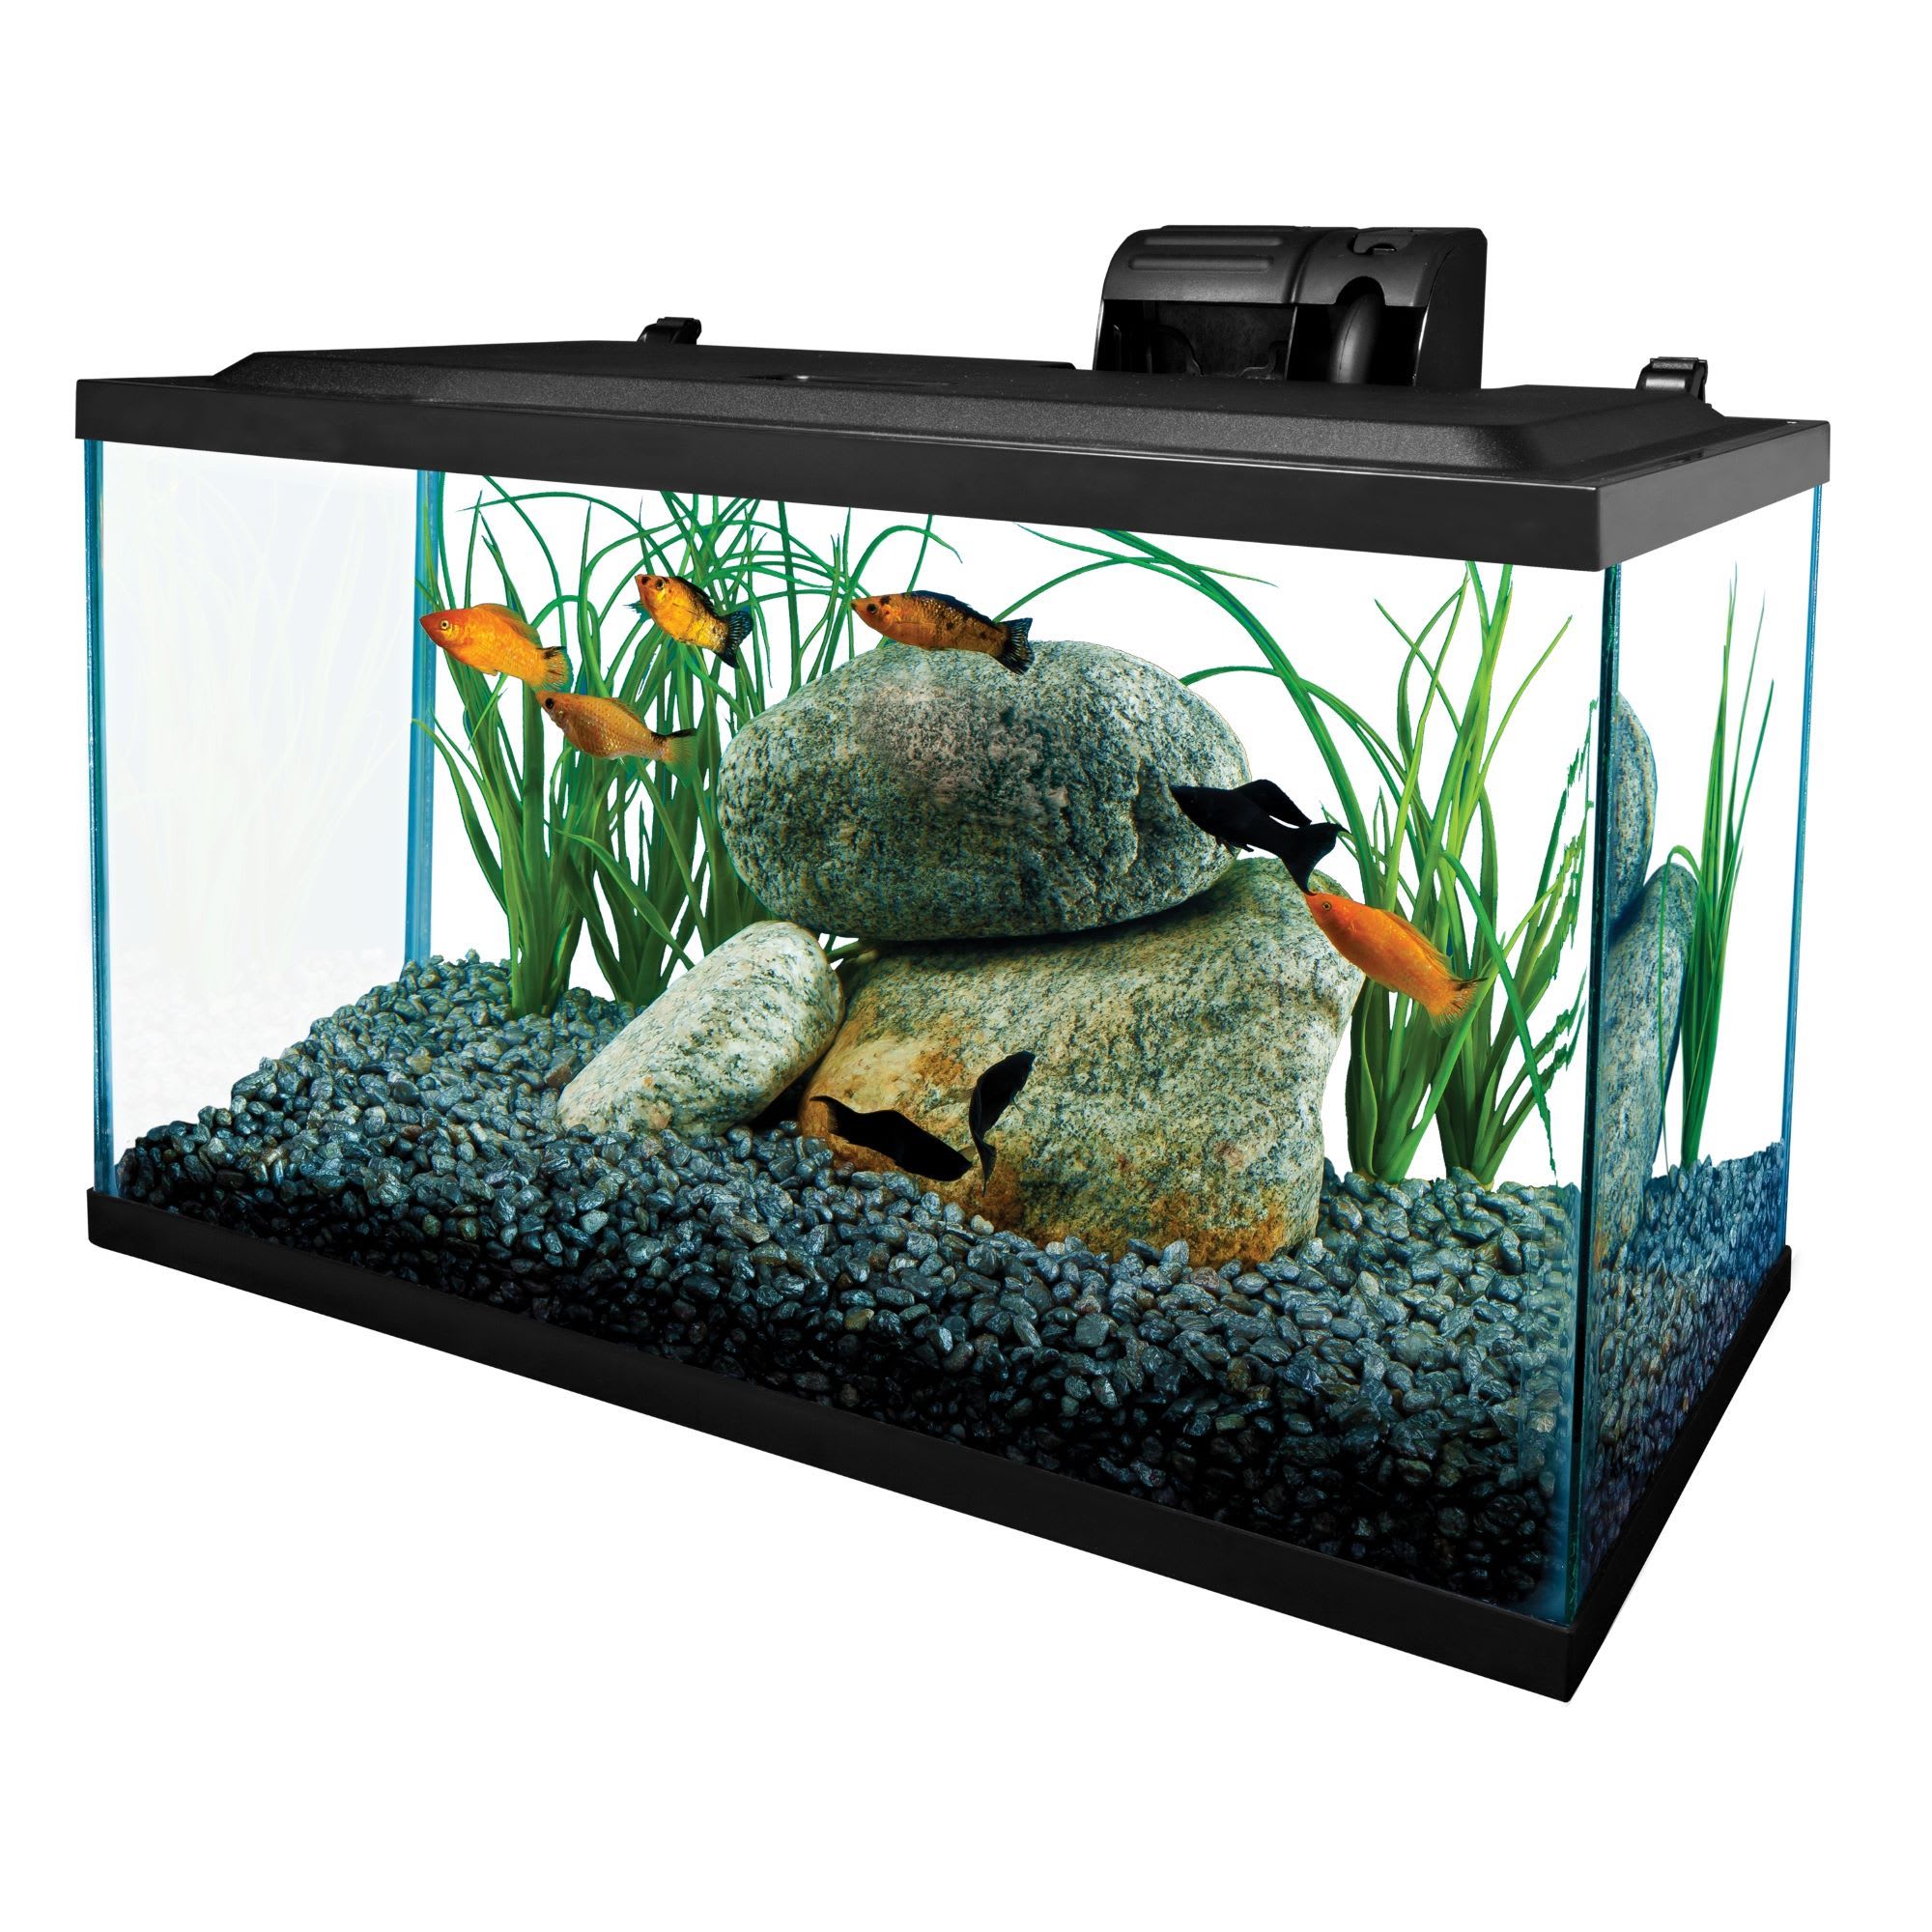 Hey guys! I recently set up my first betta tank, looking for a little  advice, it is a 35l tank and I was hoping to put around 12 neon tetras in, a